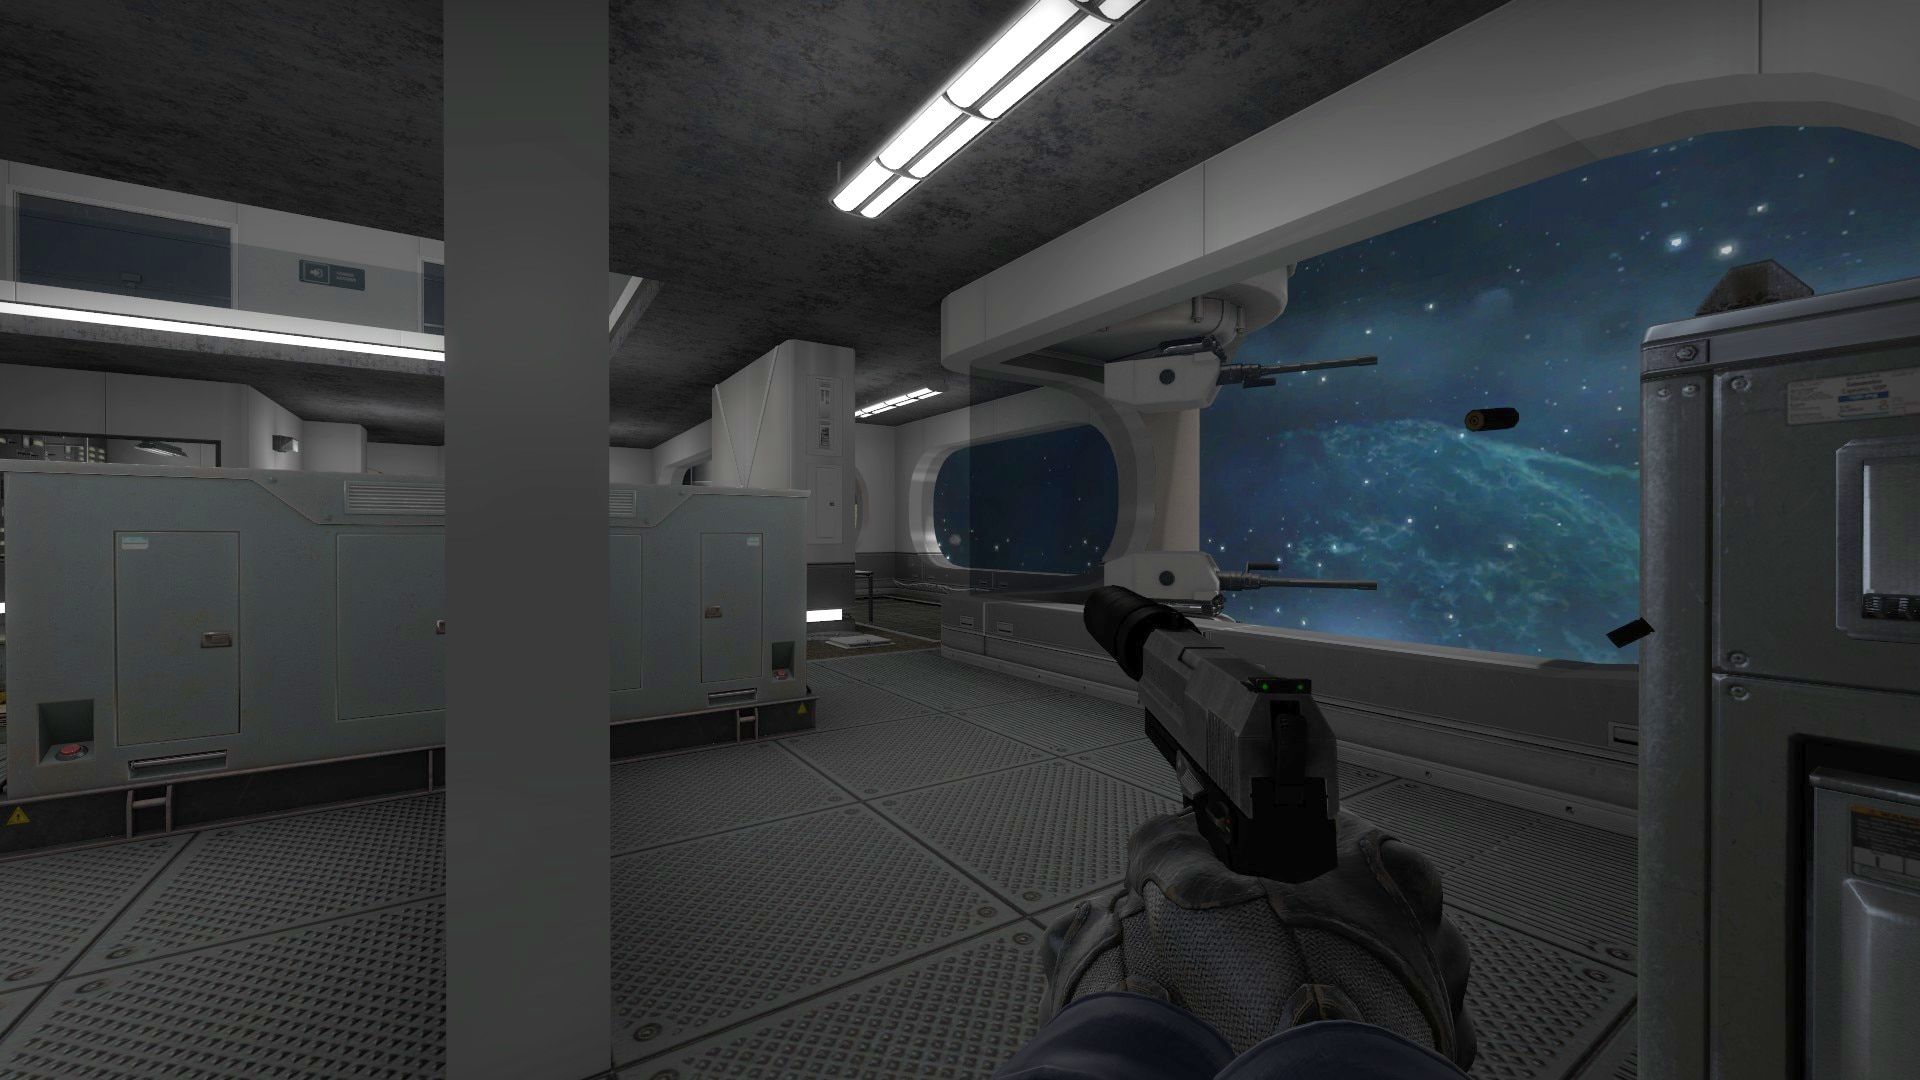 This popular CS:GO map brings 1v1 to outer space